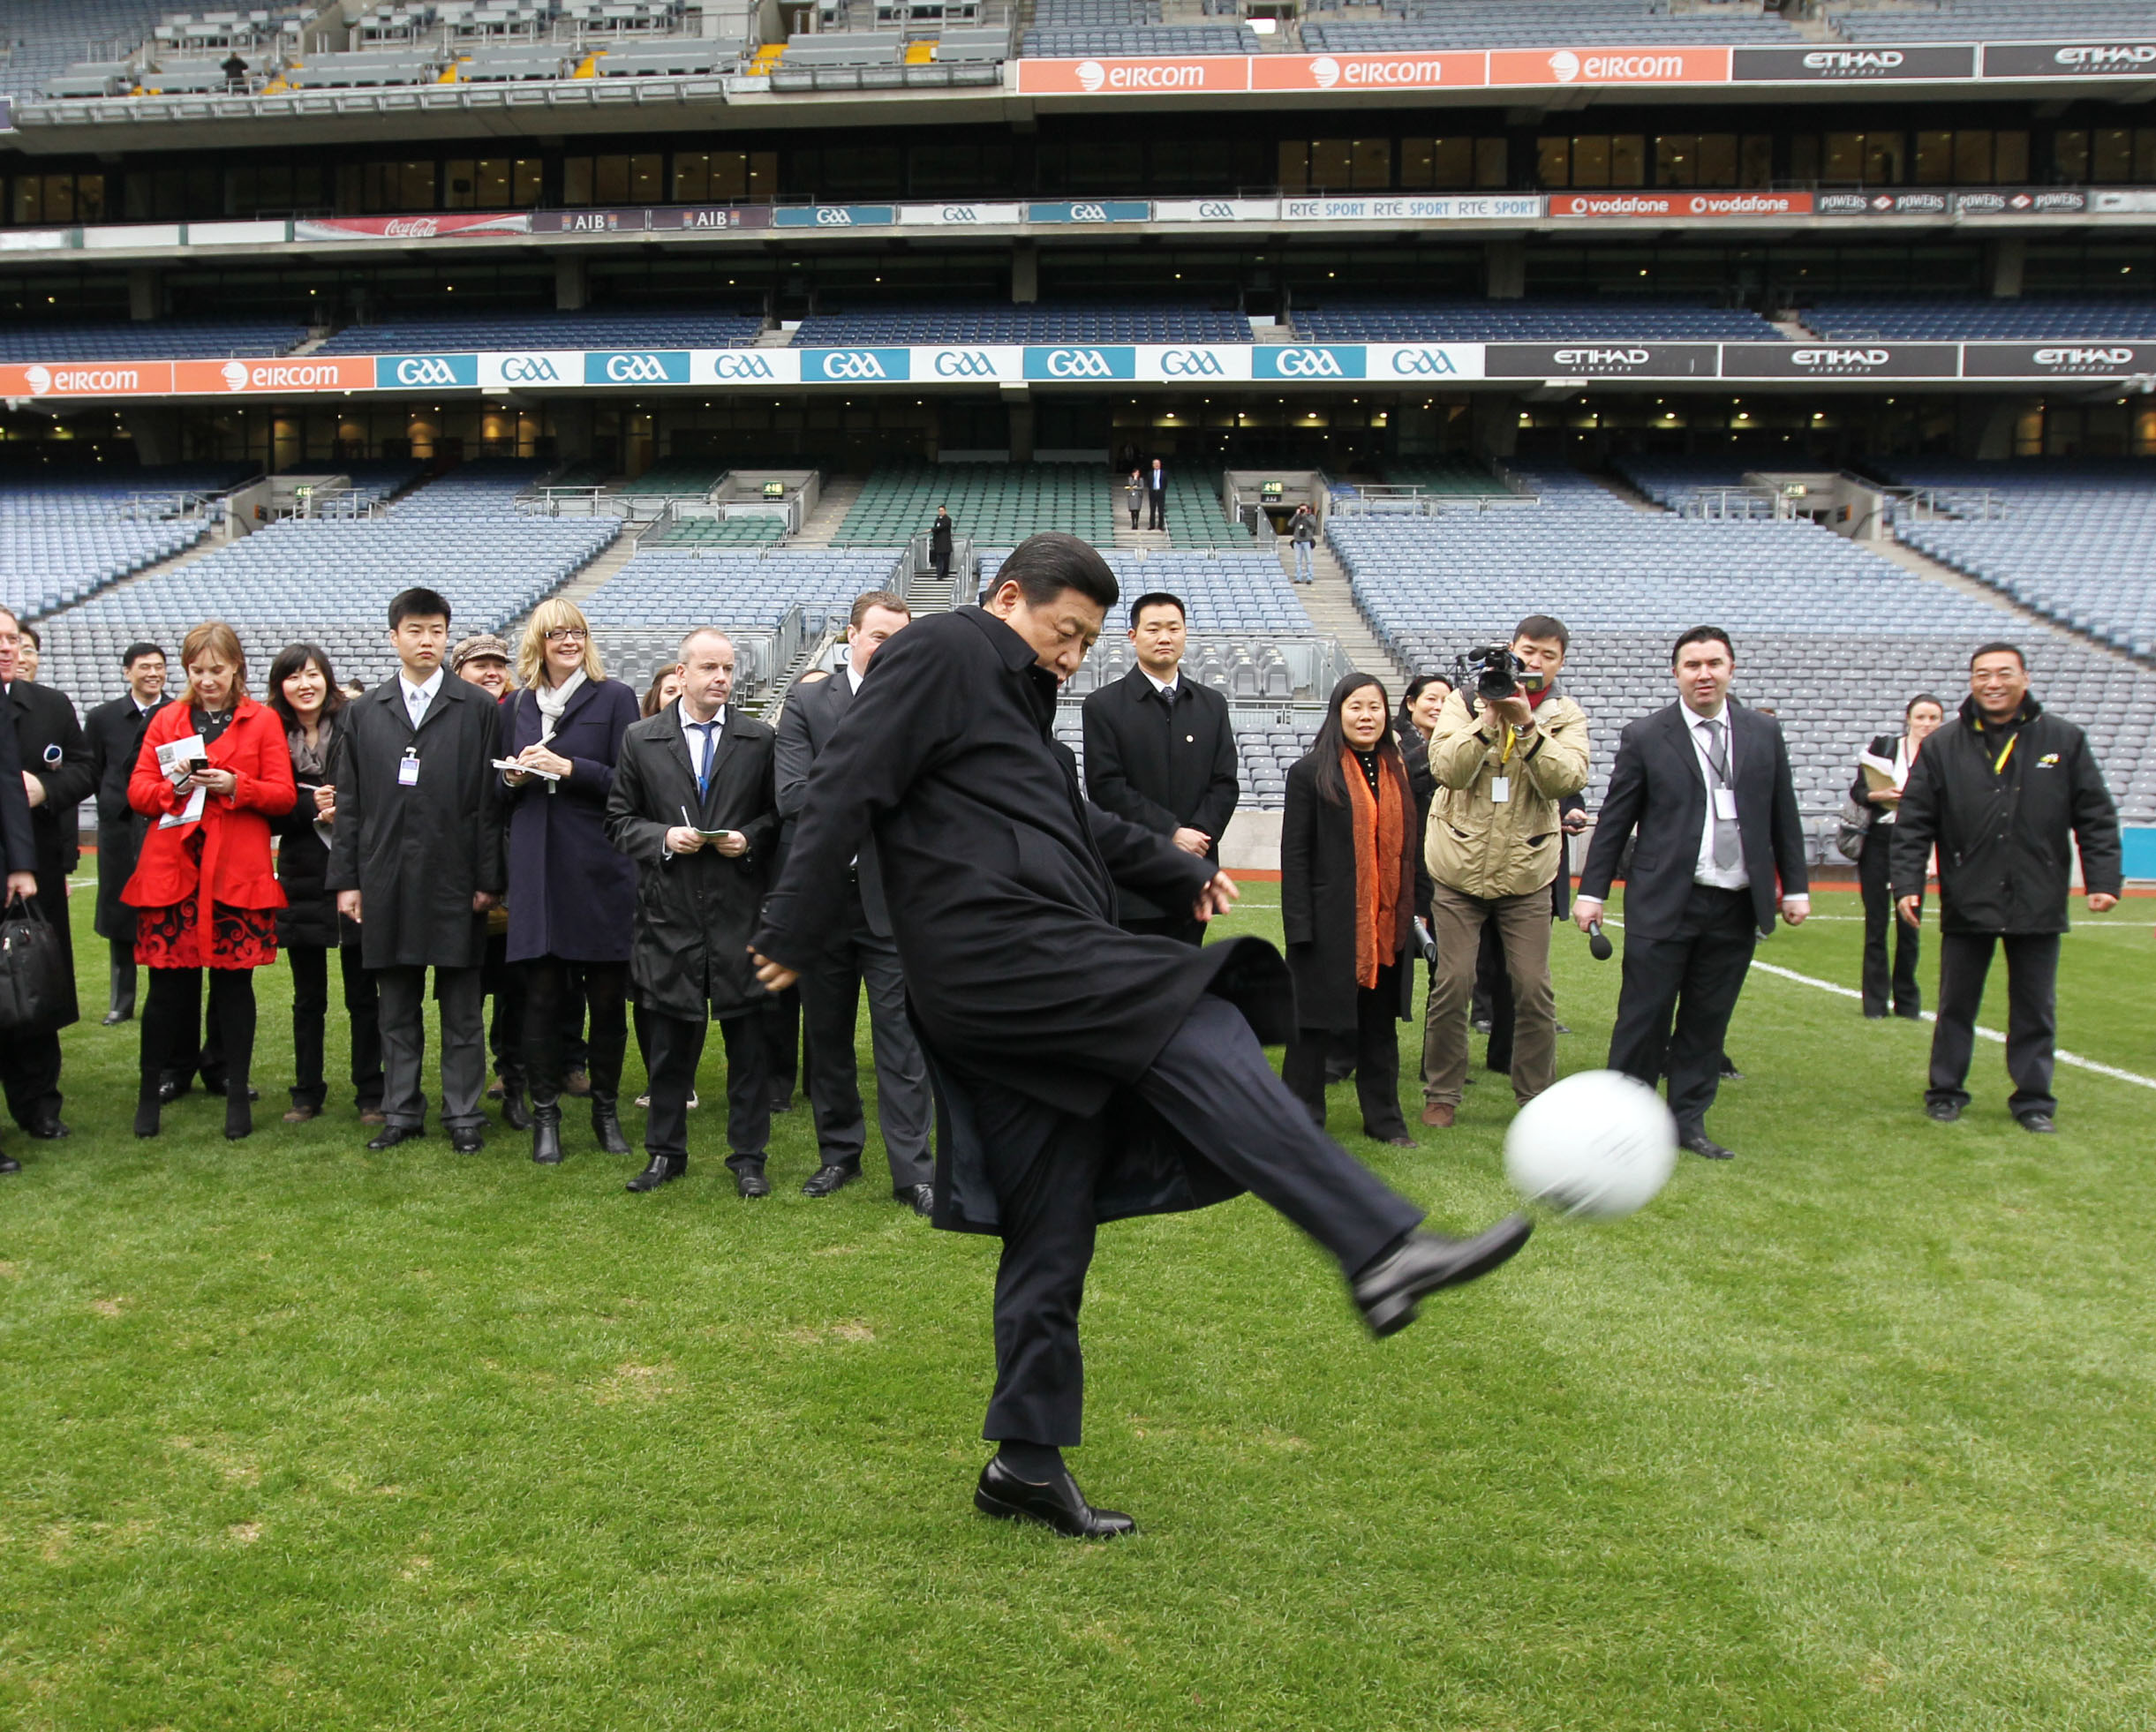 Xi Jinping showed off some of his schoolboy skills at Croke Park stadium in Dublin, Ireland in 2012 as China's vice-president. Photo: SCMP Pictures